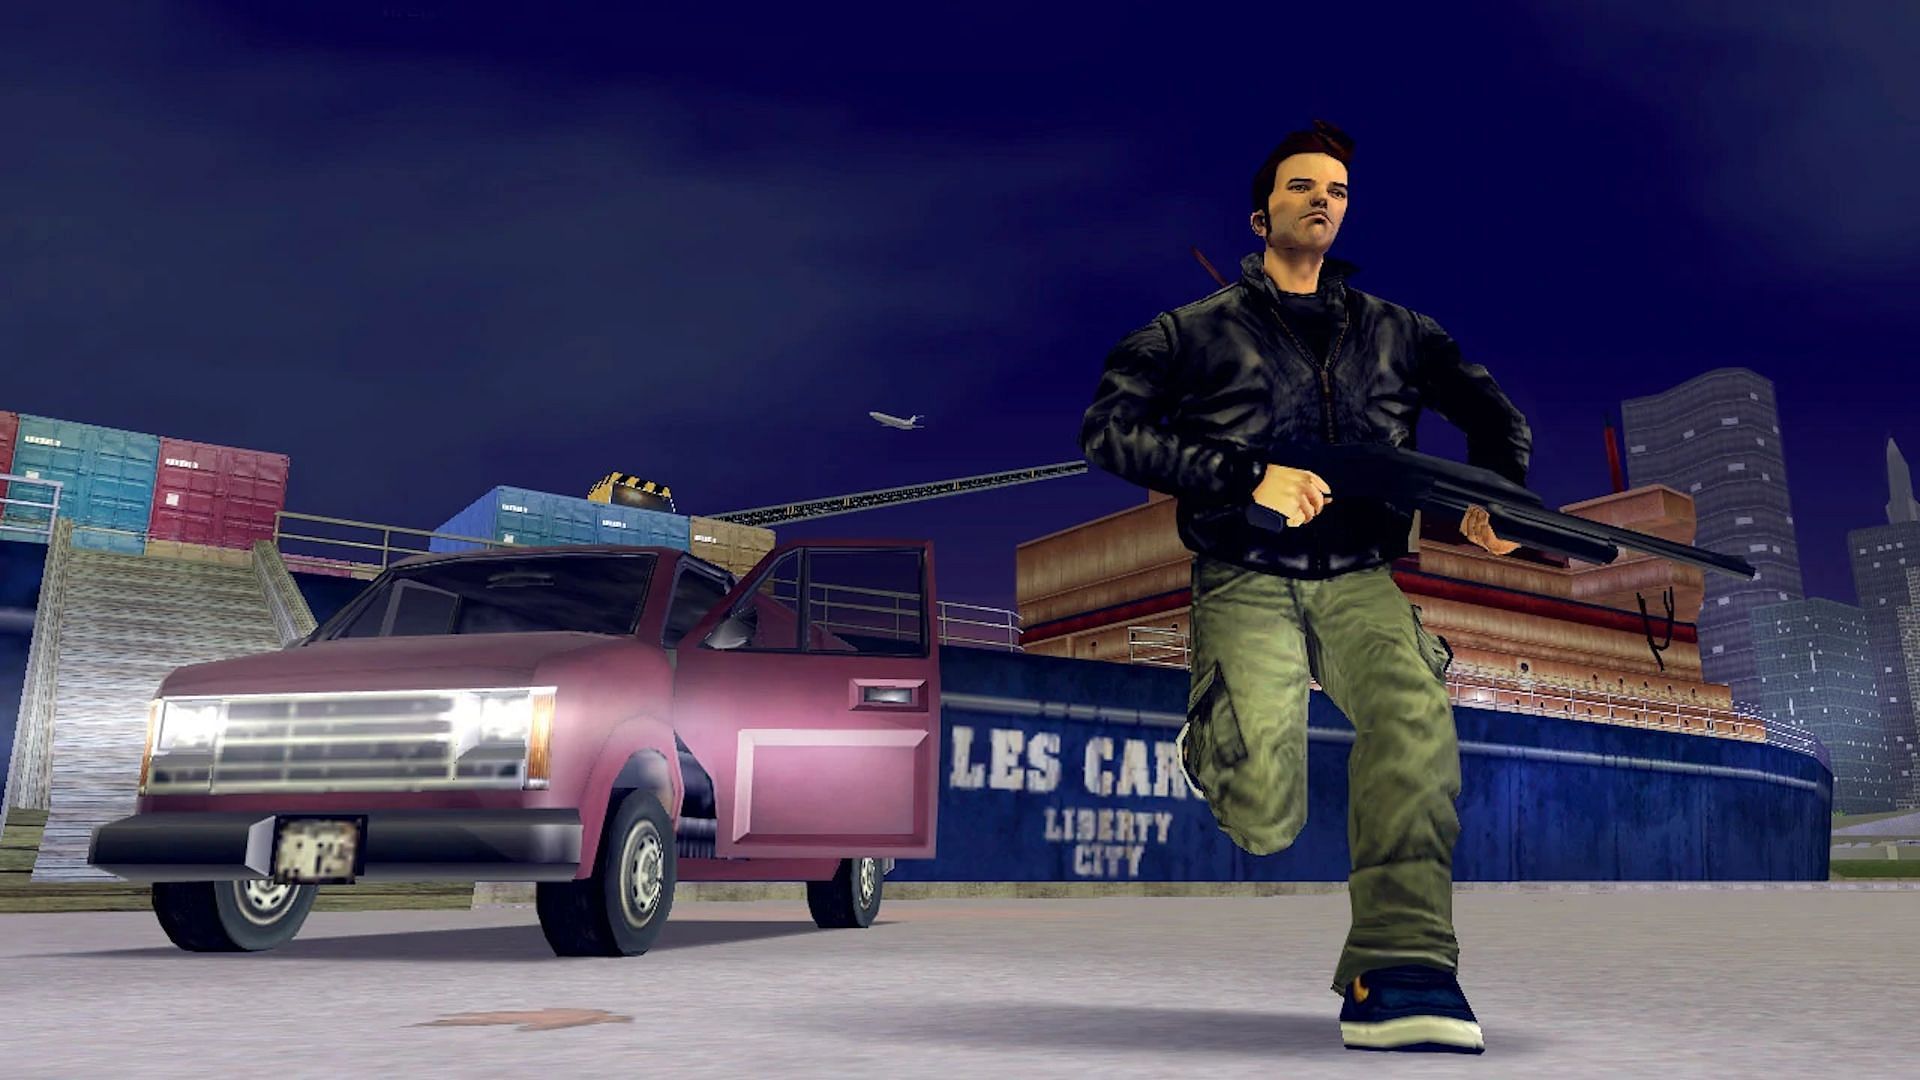 Old Grand Theft Auto games usually had some evil protagonists (Image via Rockstar Games)